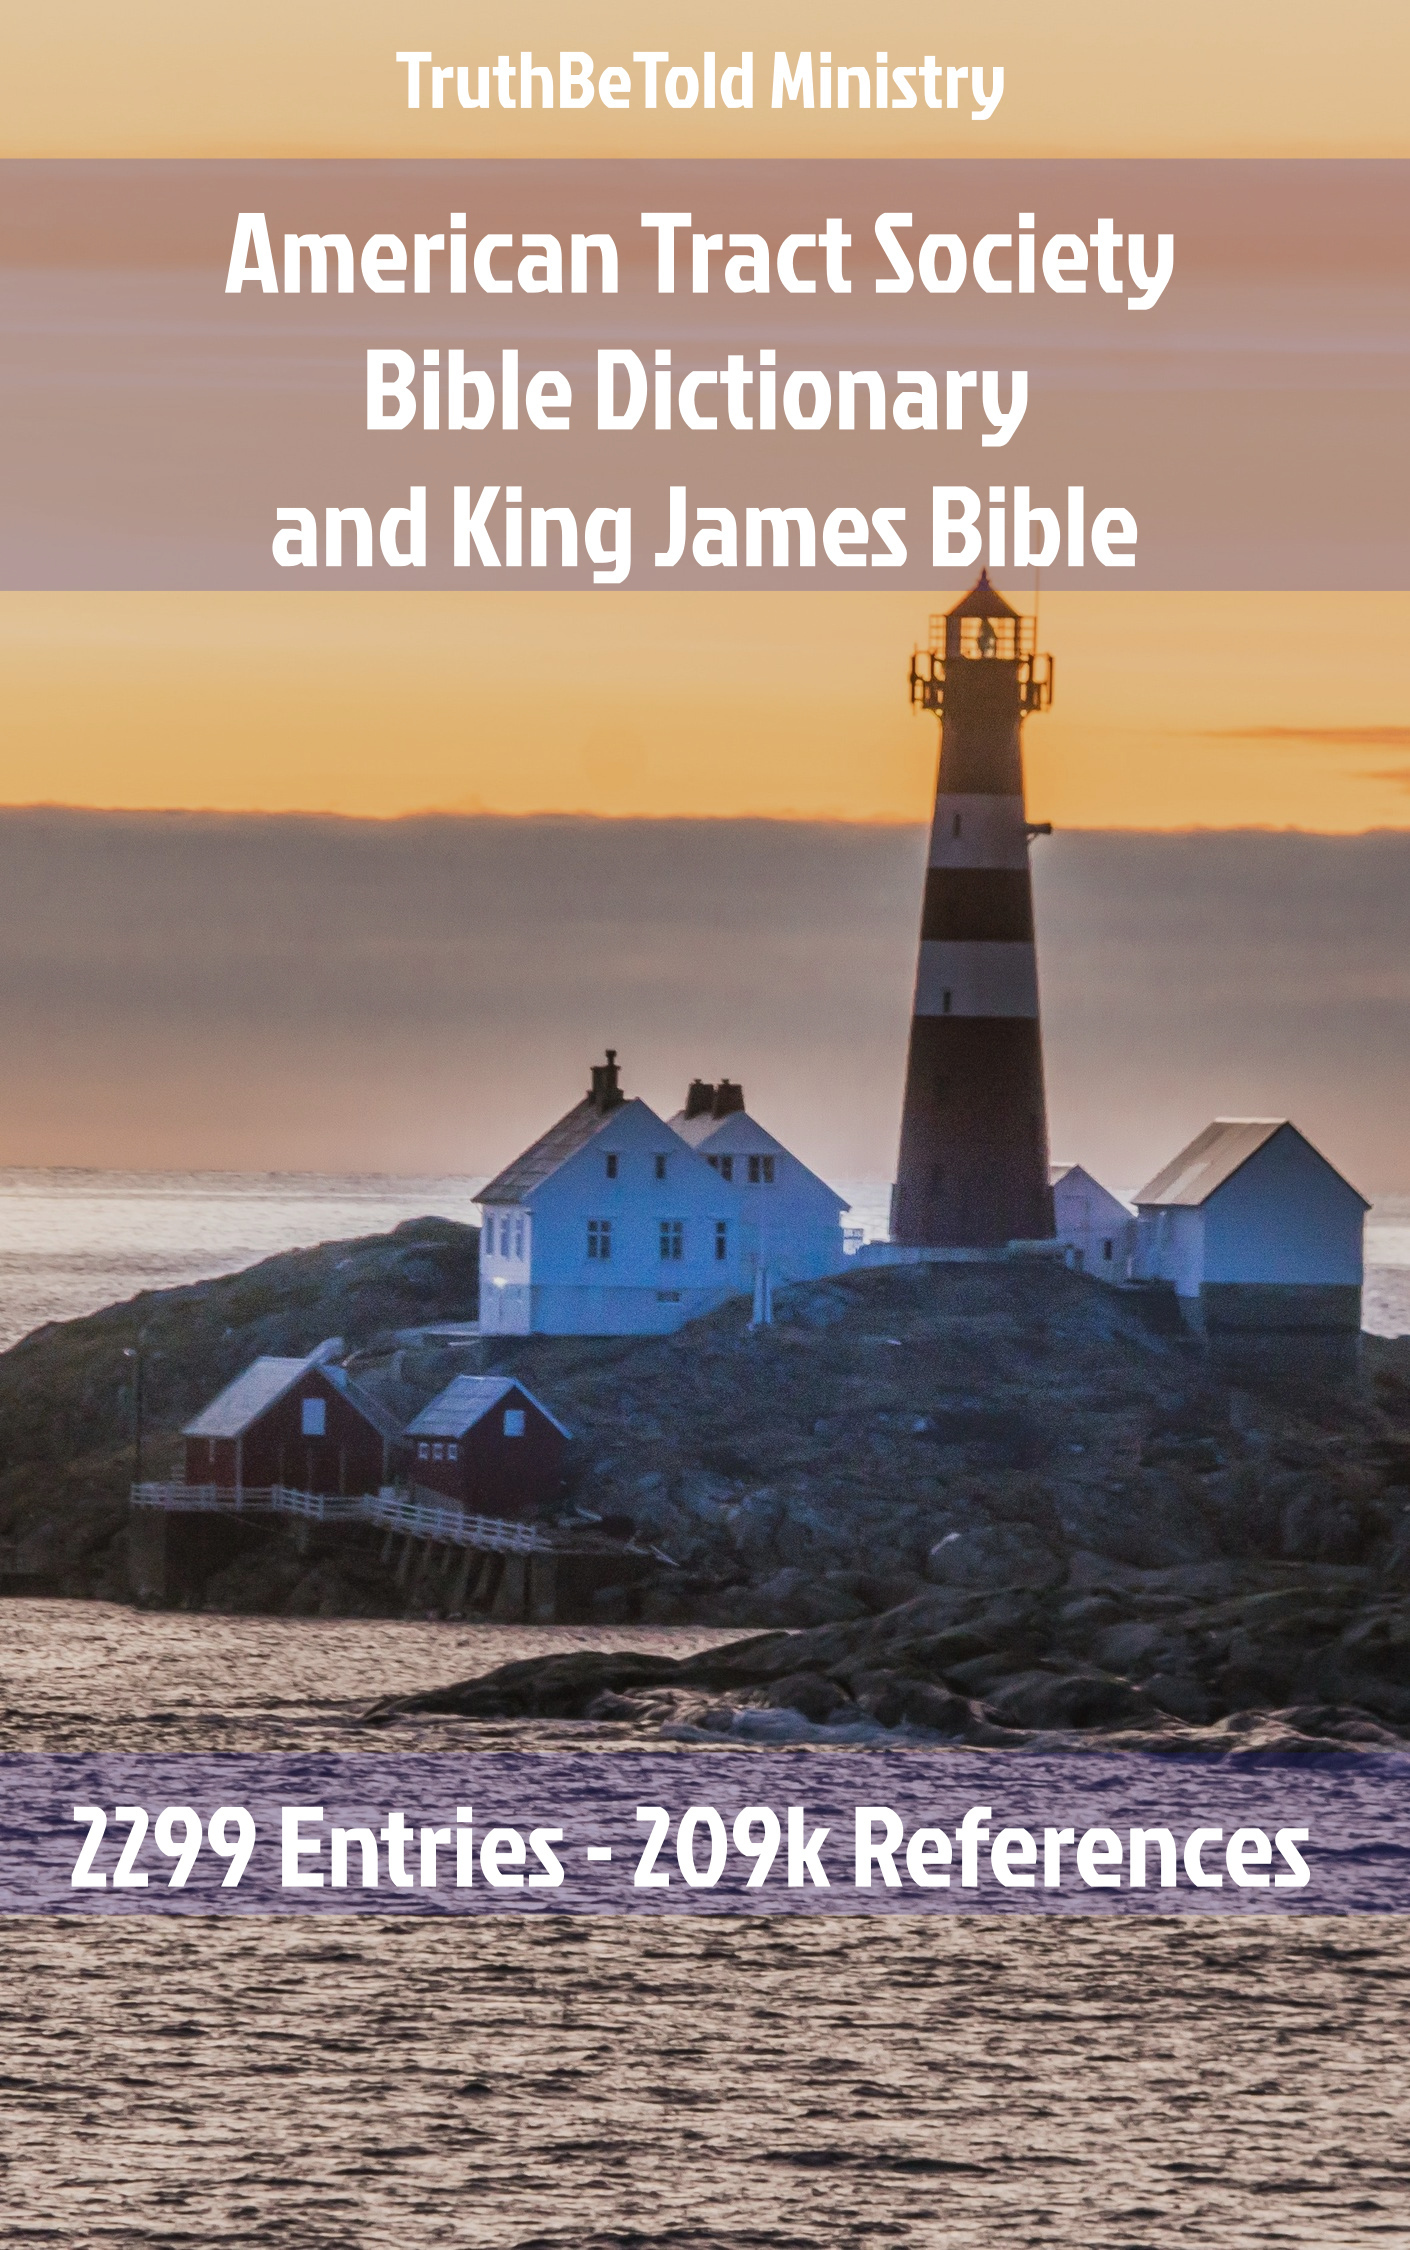 American Tract Society Bible Dictionary and King James Bible